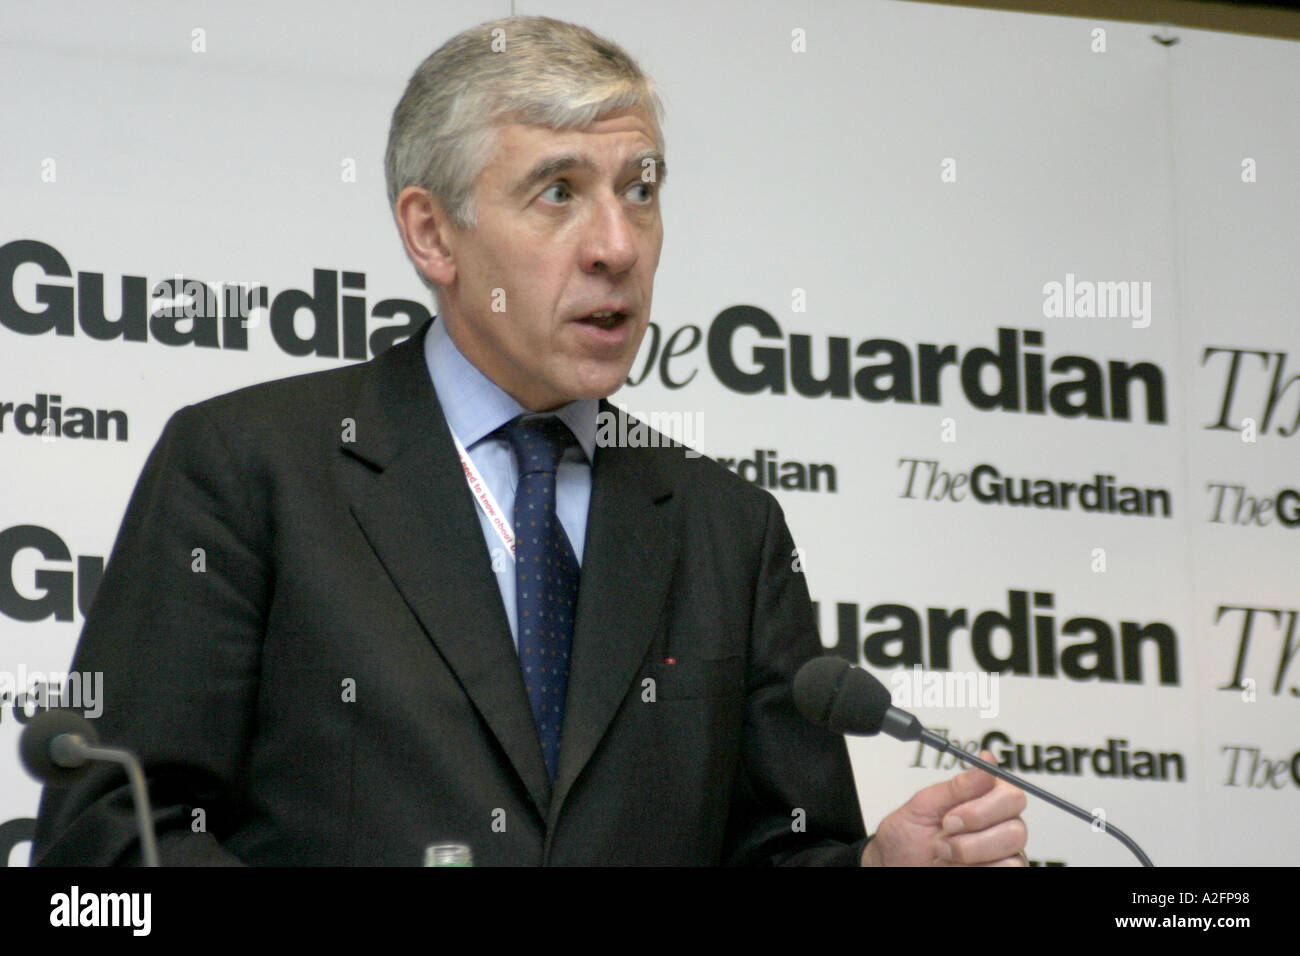 jack straw mp foreign secretary speech conf 2004 labour party guardian nwpr fringe meeting england uk Stock Photo